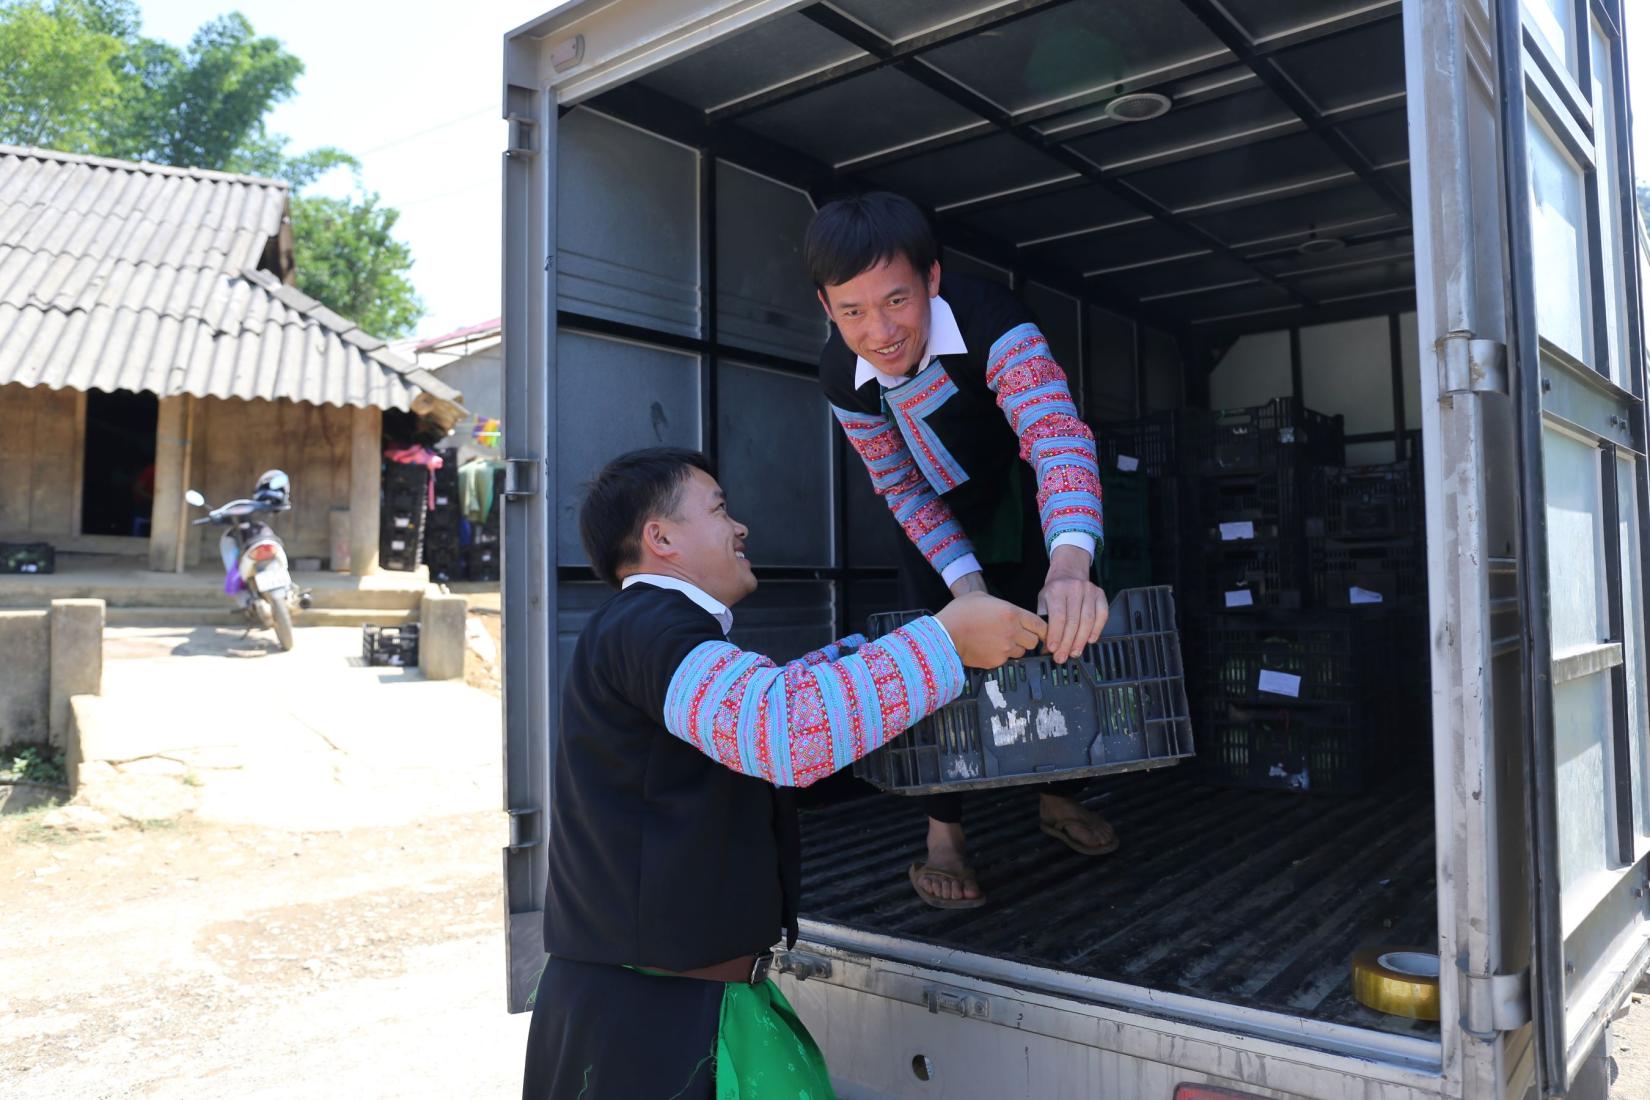 Two men smiling loading crates into a truck